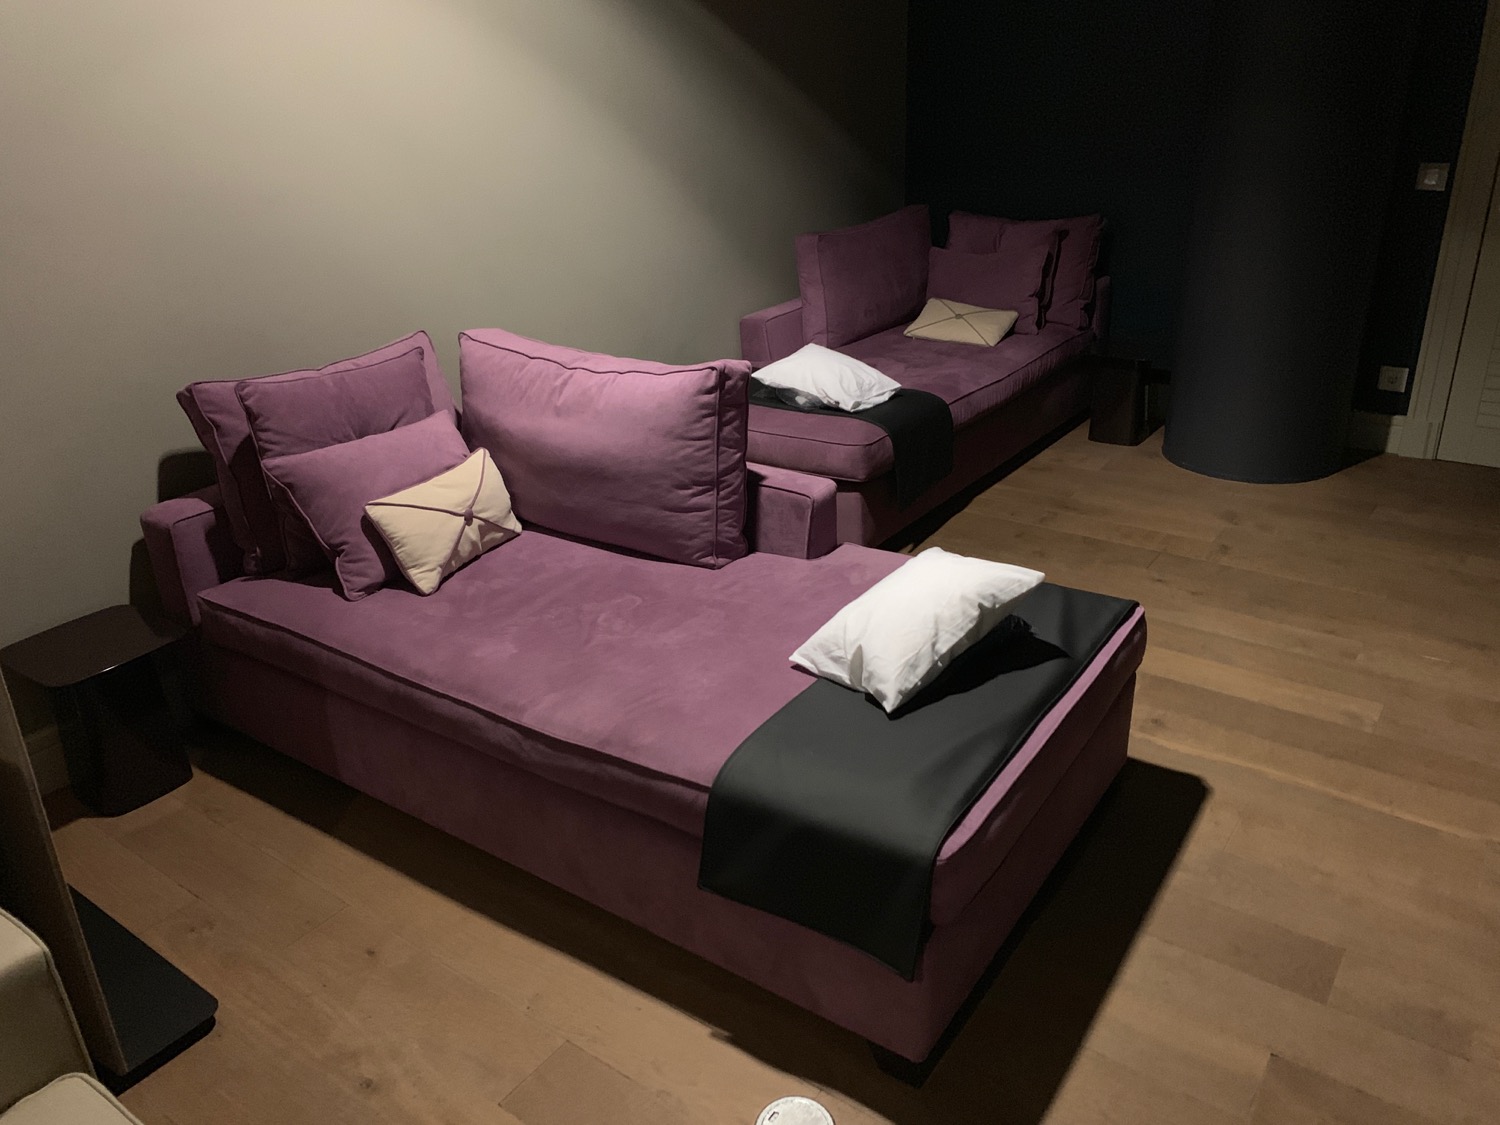 a couches in a room